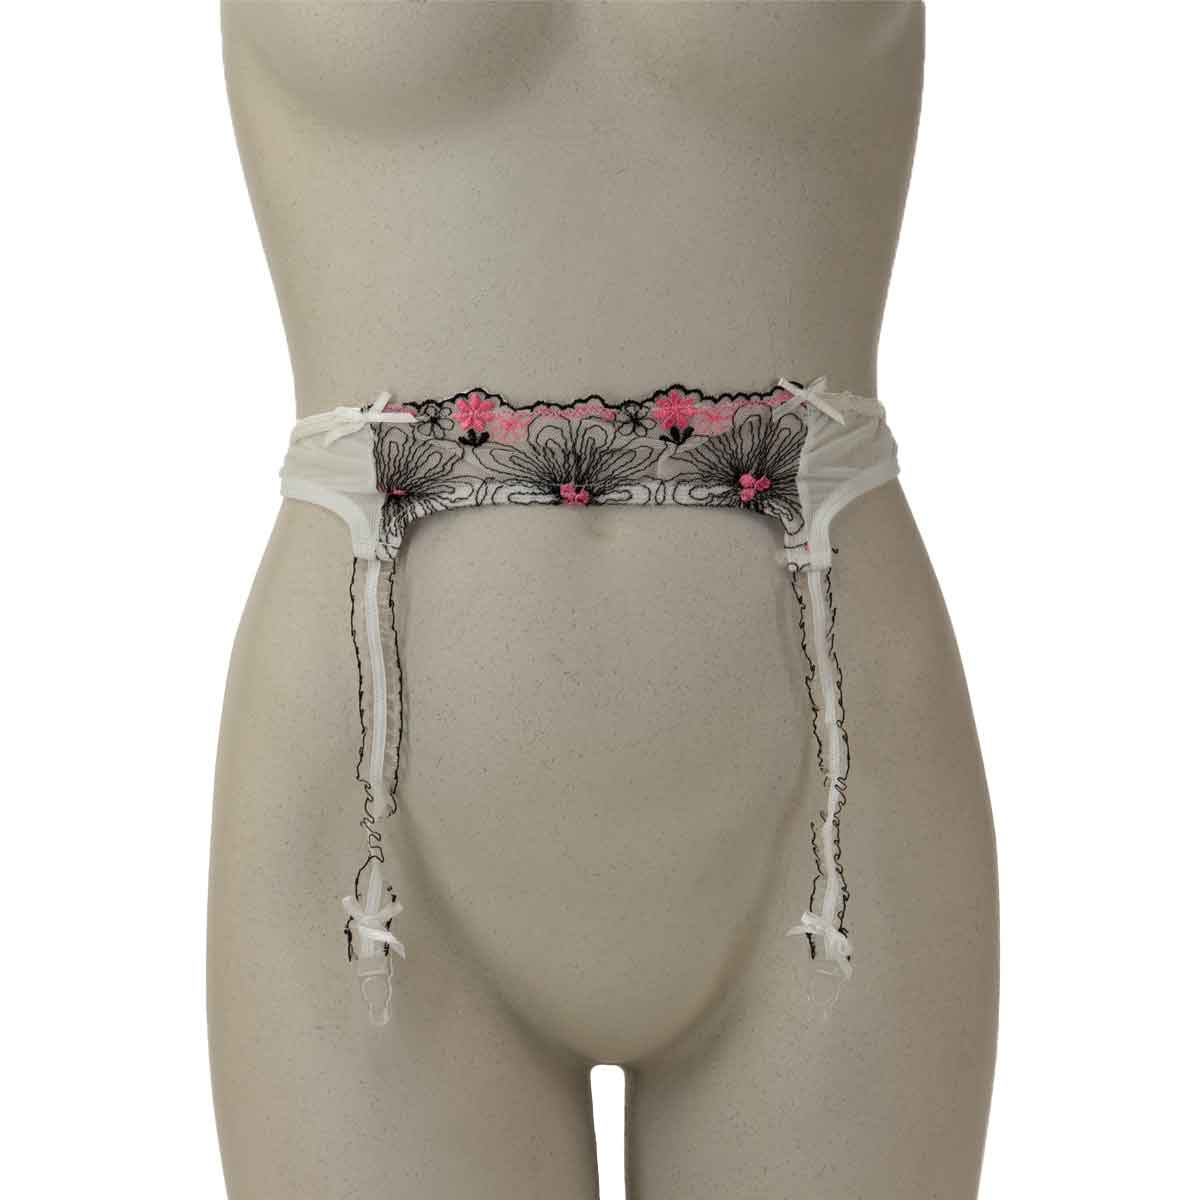 Sophie B - Flower Lace Garter - White - Assorted Sizes